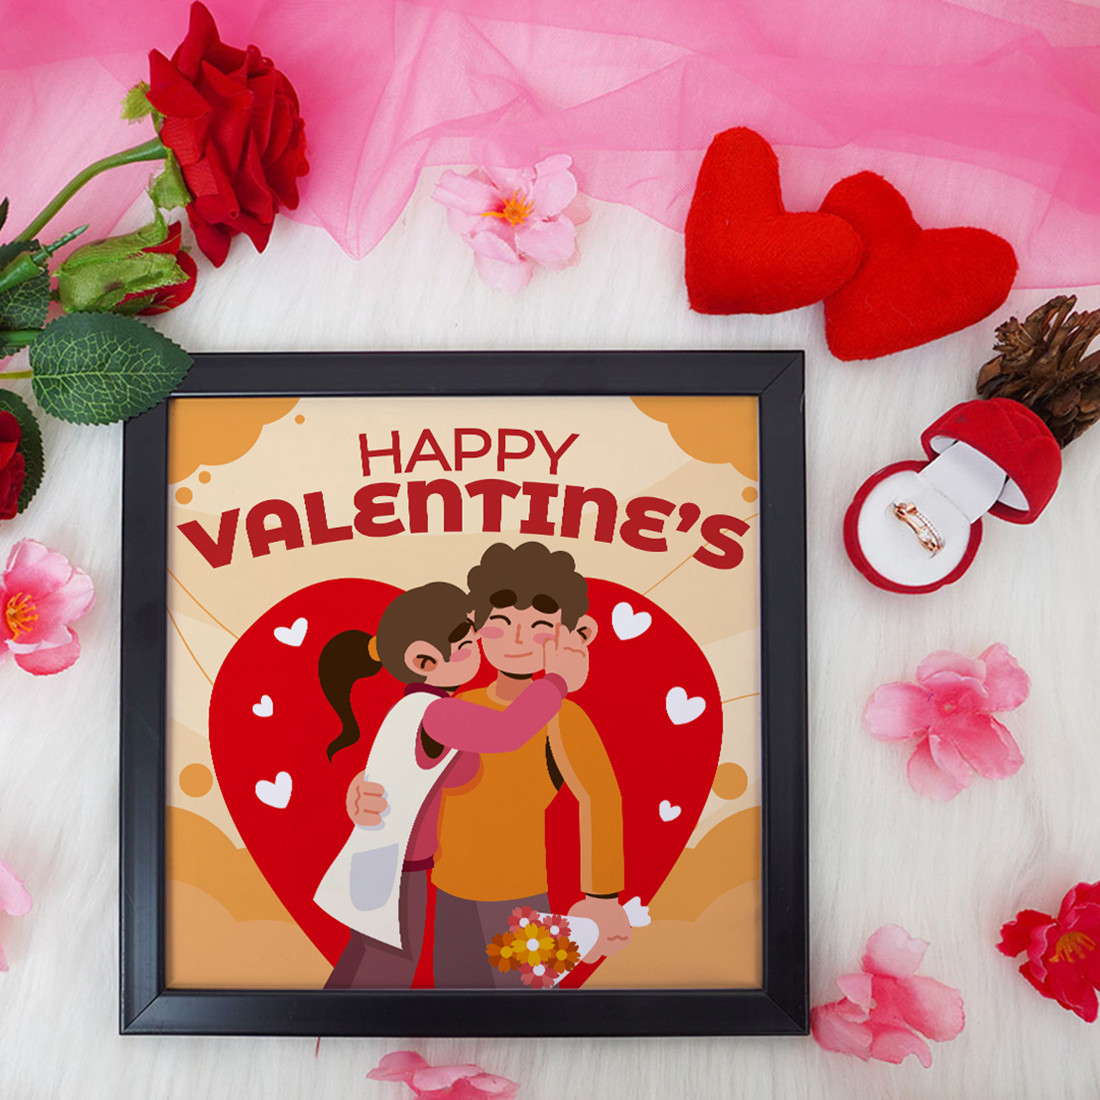 Happy Valentine's Valentine Gift Set | Valentine's Day Gifts for Girlfriend | Valentine Gift for Wife | Ring for Women/Girl | Photo Frame (8x8 Inches)